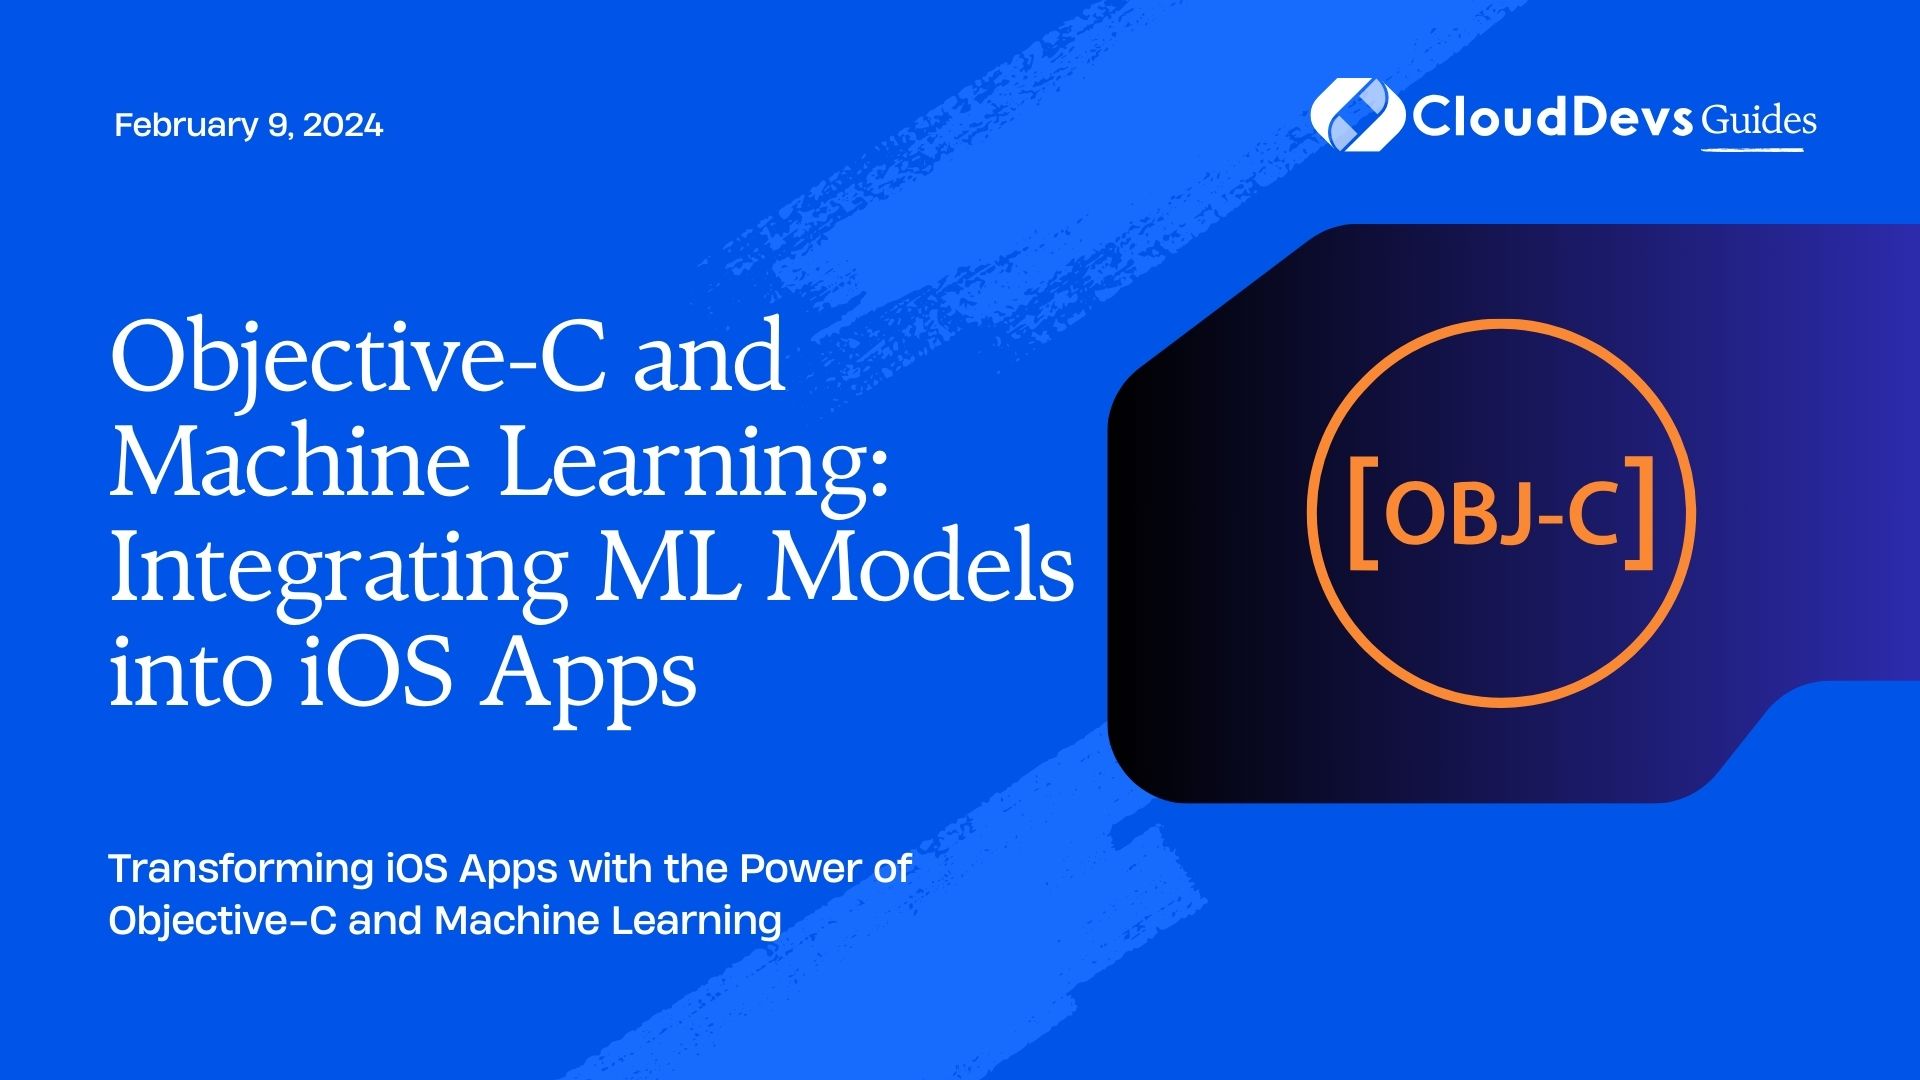 Objective-C and Machine Learning: Integrating ML Models into iOS Apps